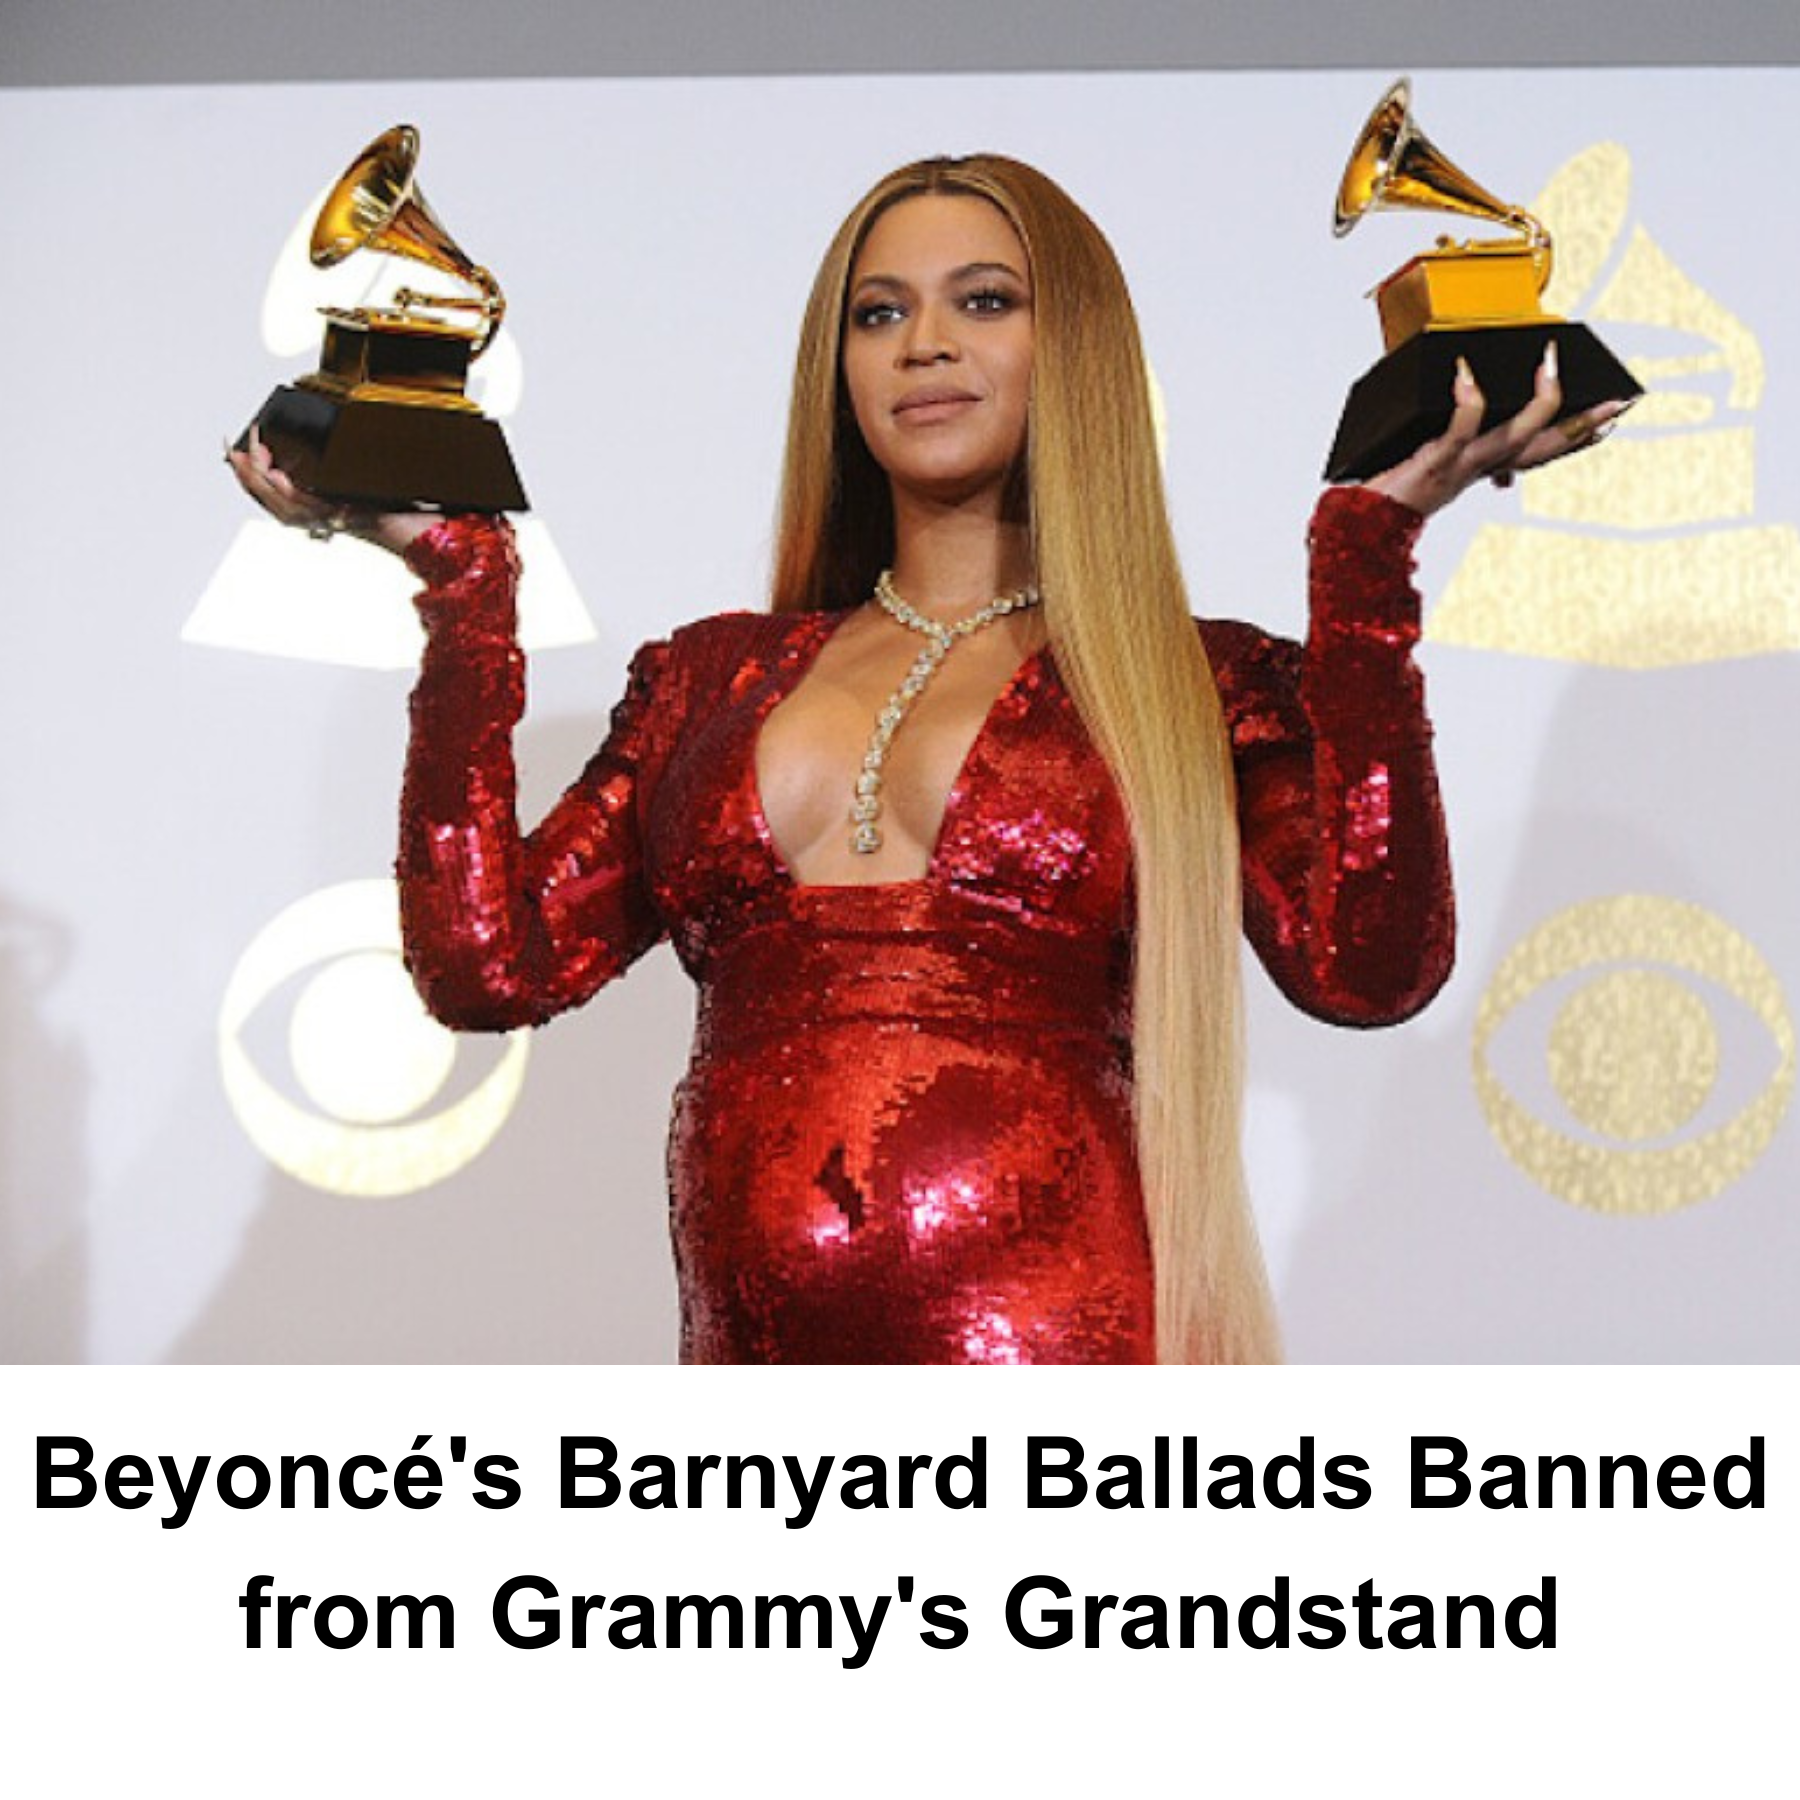 Beyoncé’s Country Album Ineligible for Grammy’s Album of the Year Nomination